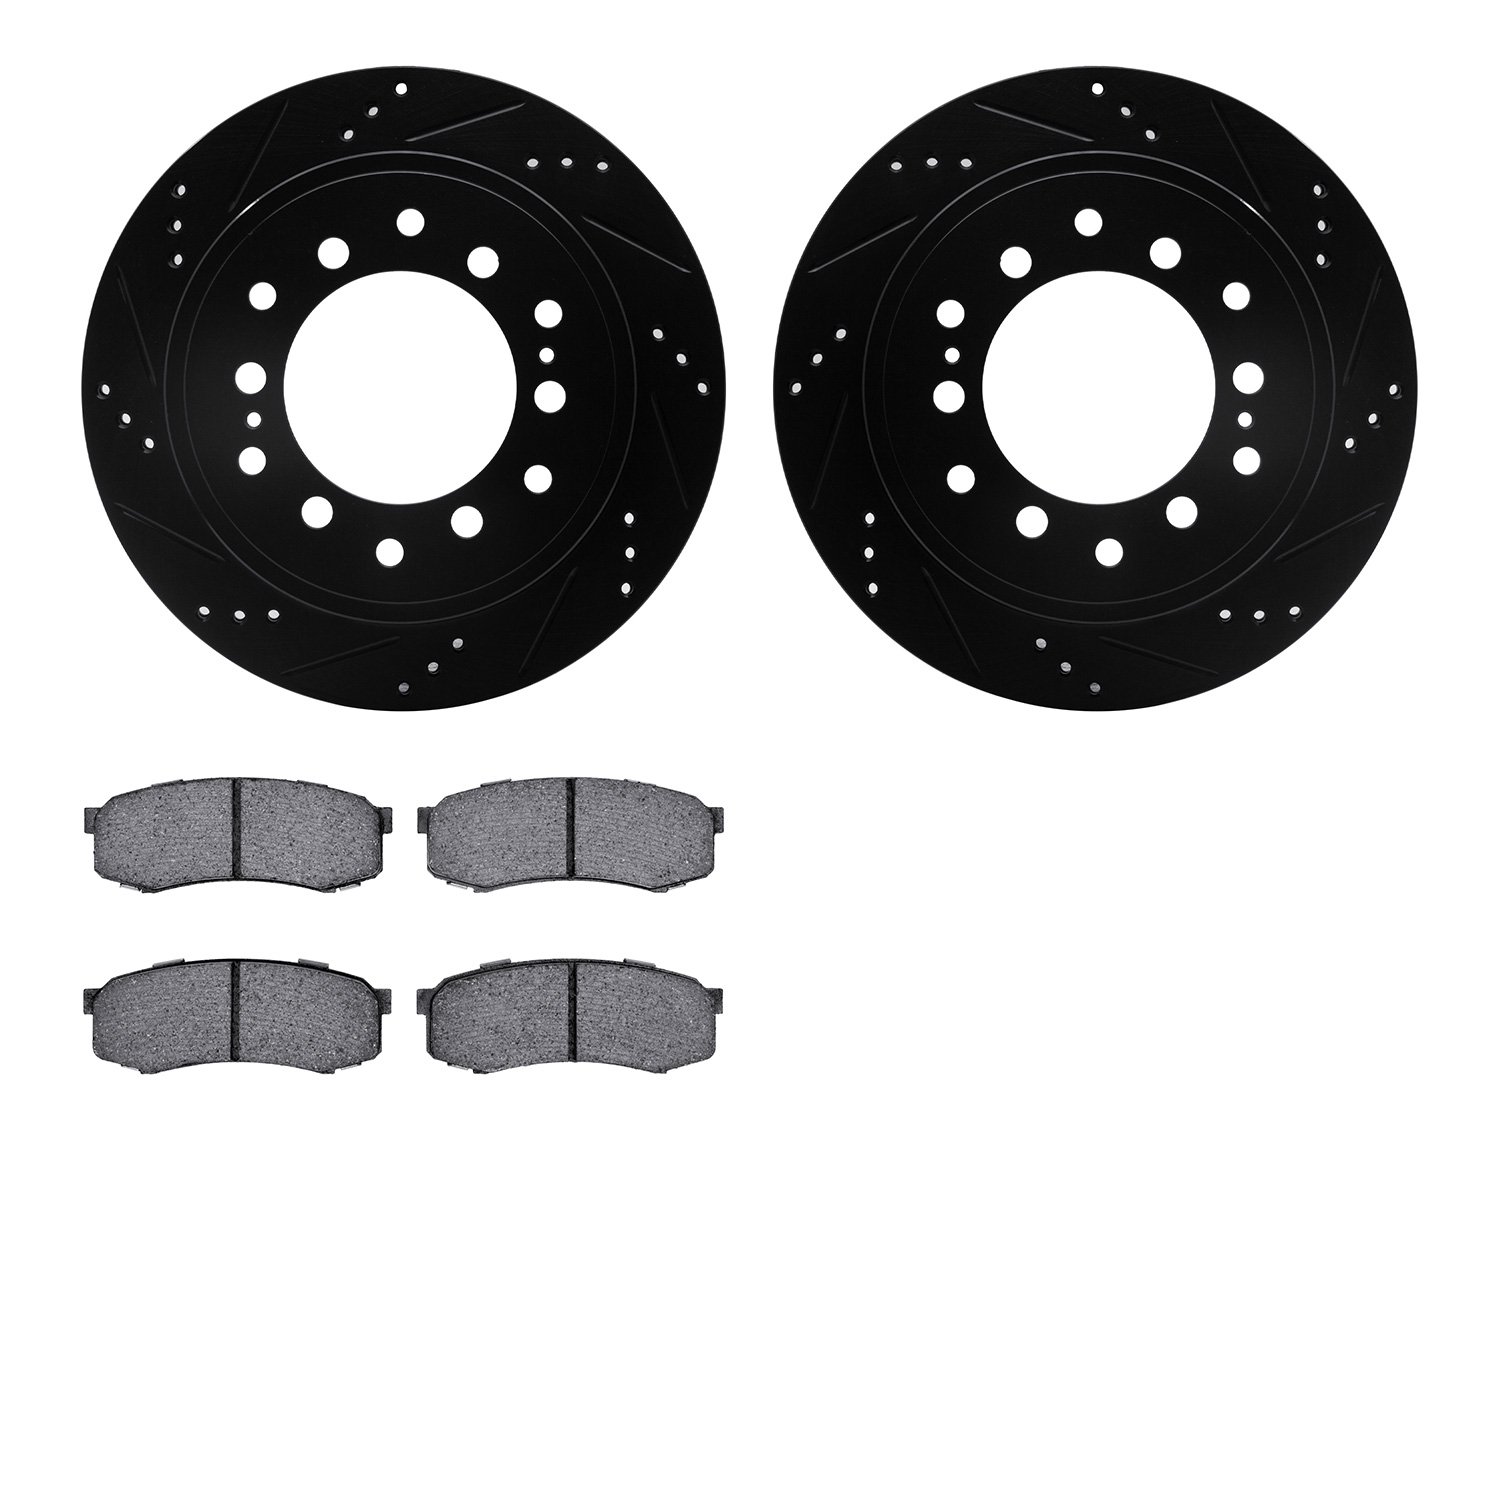 8302-76100 Drilled/Slotted Brake Rotors with 3000-Series Ceramic Brake Pads Kit [Black], Fits Select Lexus/Toyota/Scion, Positio